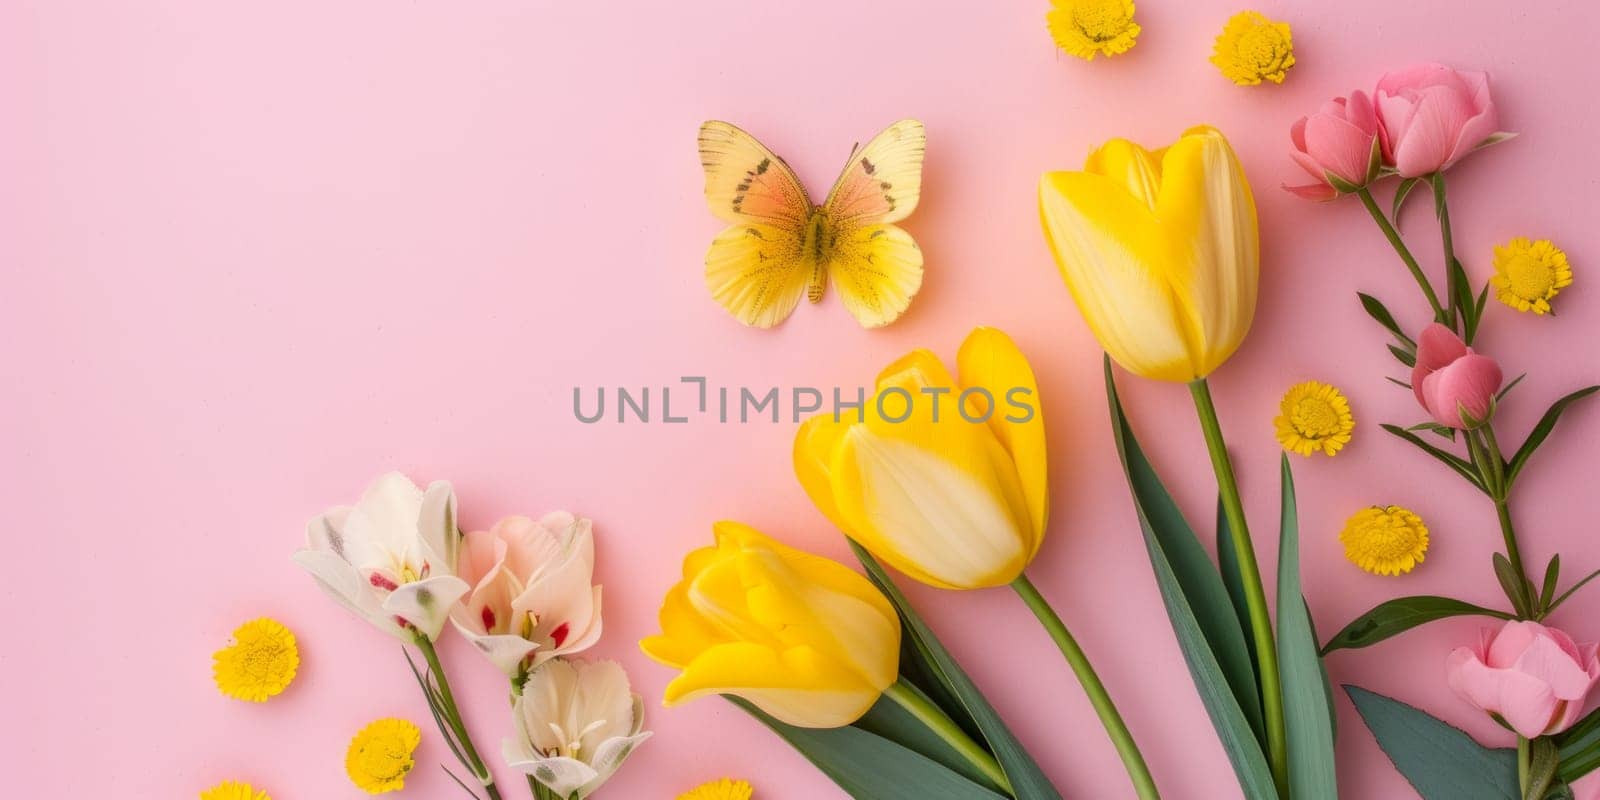 Easter spring flower background with fresh yellow flowers and butterflies isolated on pink background by papatonic